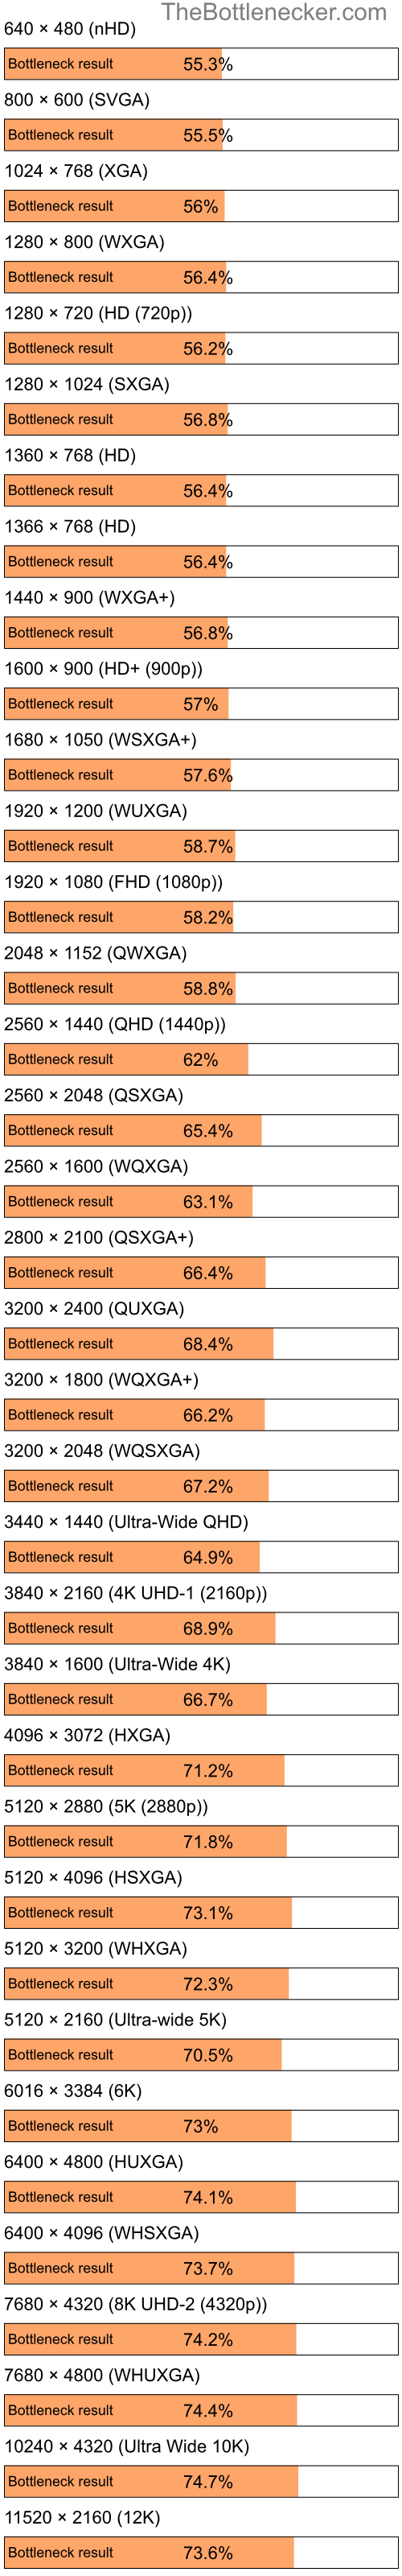 Bottleneck results by resolution for Intel Celeron M and NVIDIA Quadro FX 360M in Processor Intense Tasks